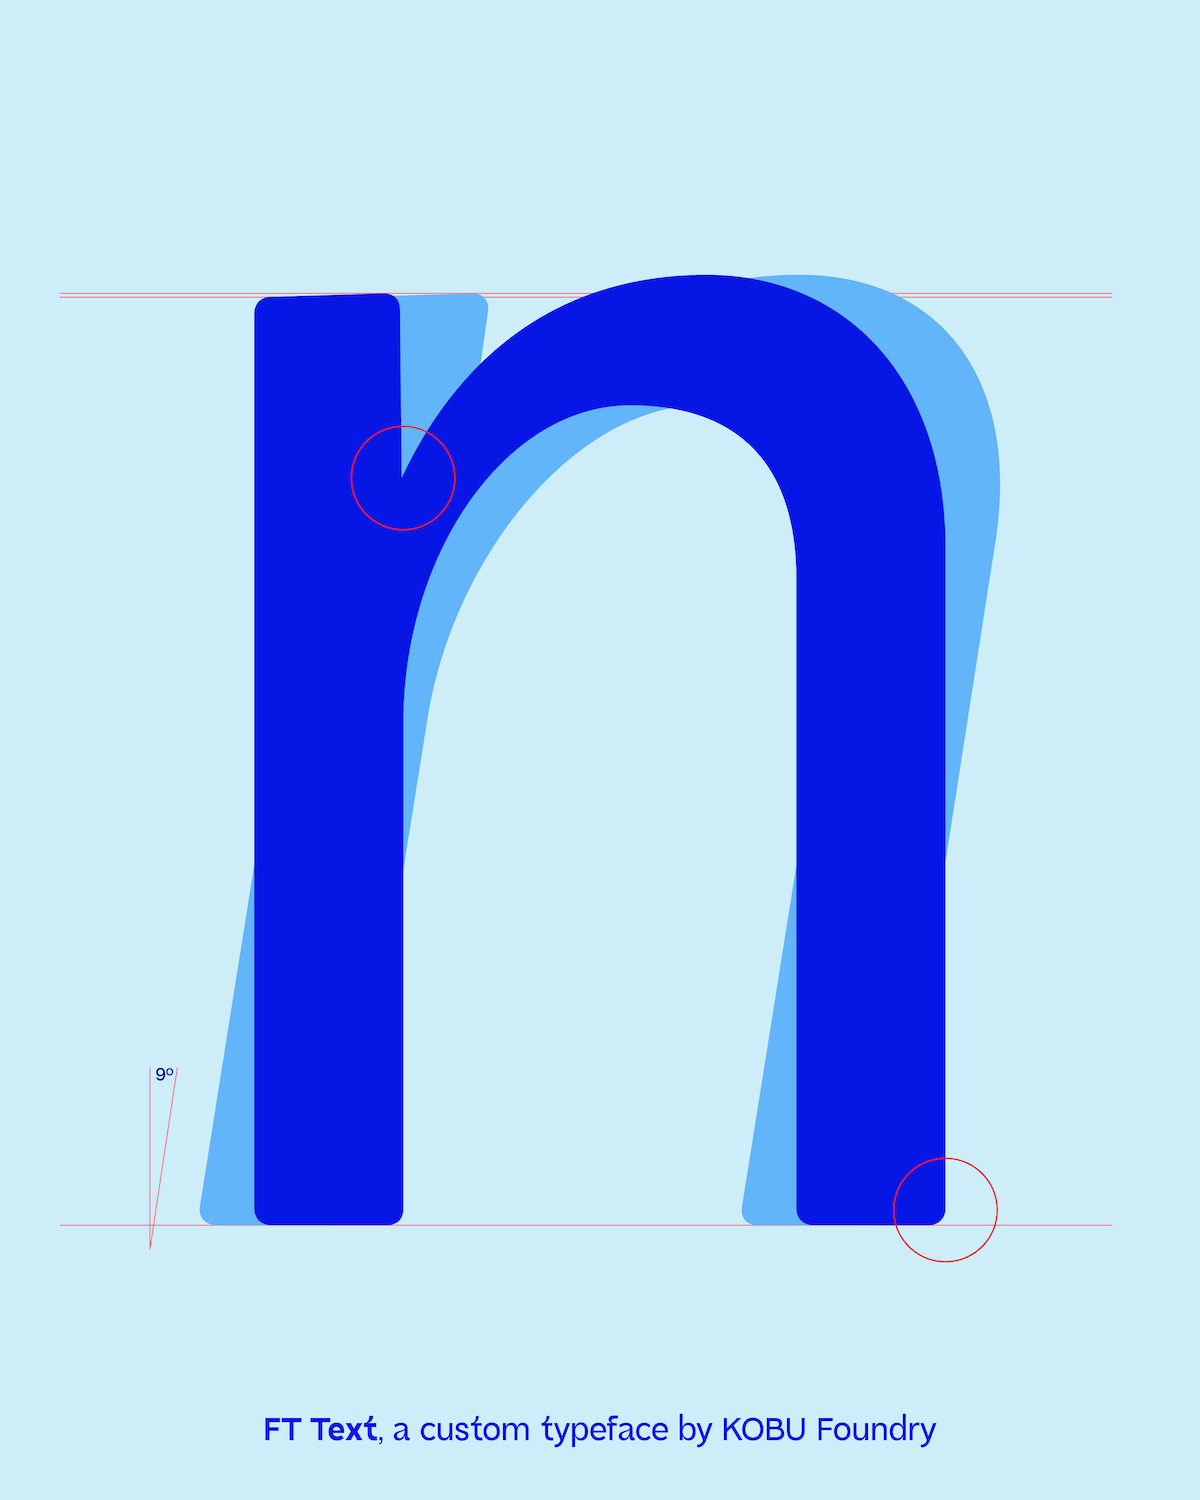 FT Text, a custom font by KOBU Foundry for Facialteam rebranding, 2022. Letter 'n' in ultramarine blue on a pale blue background. 